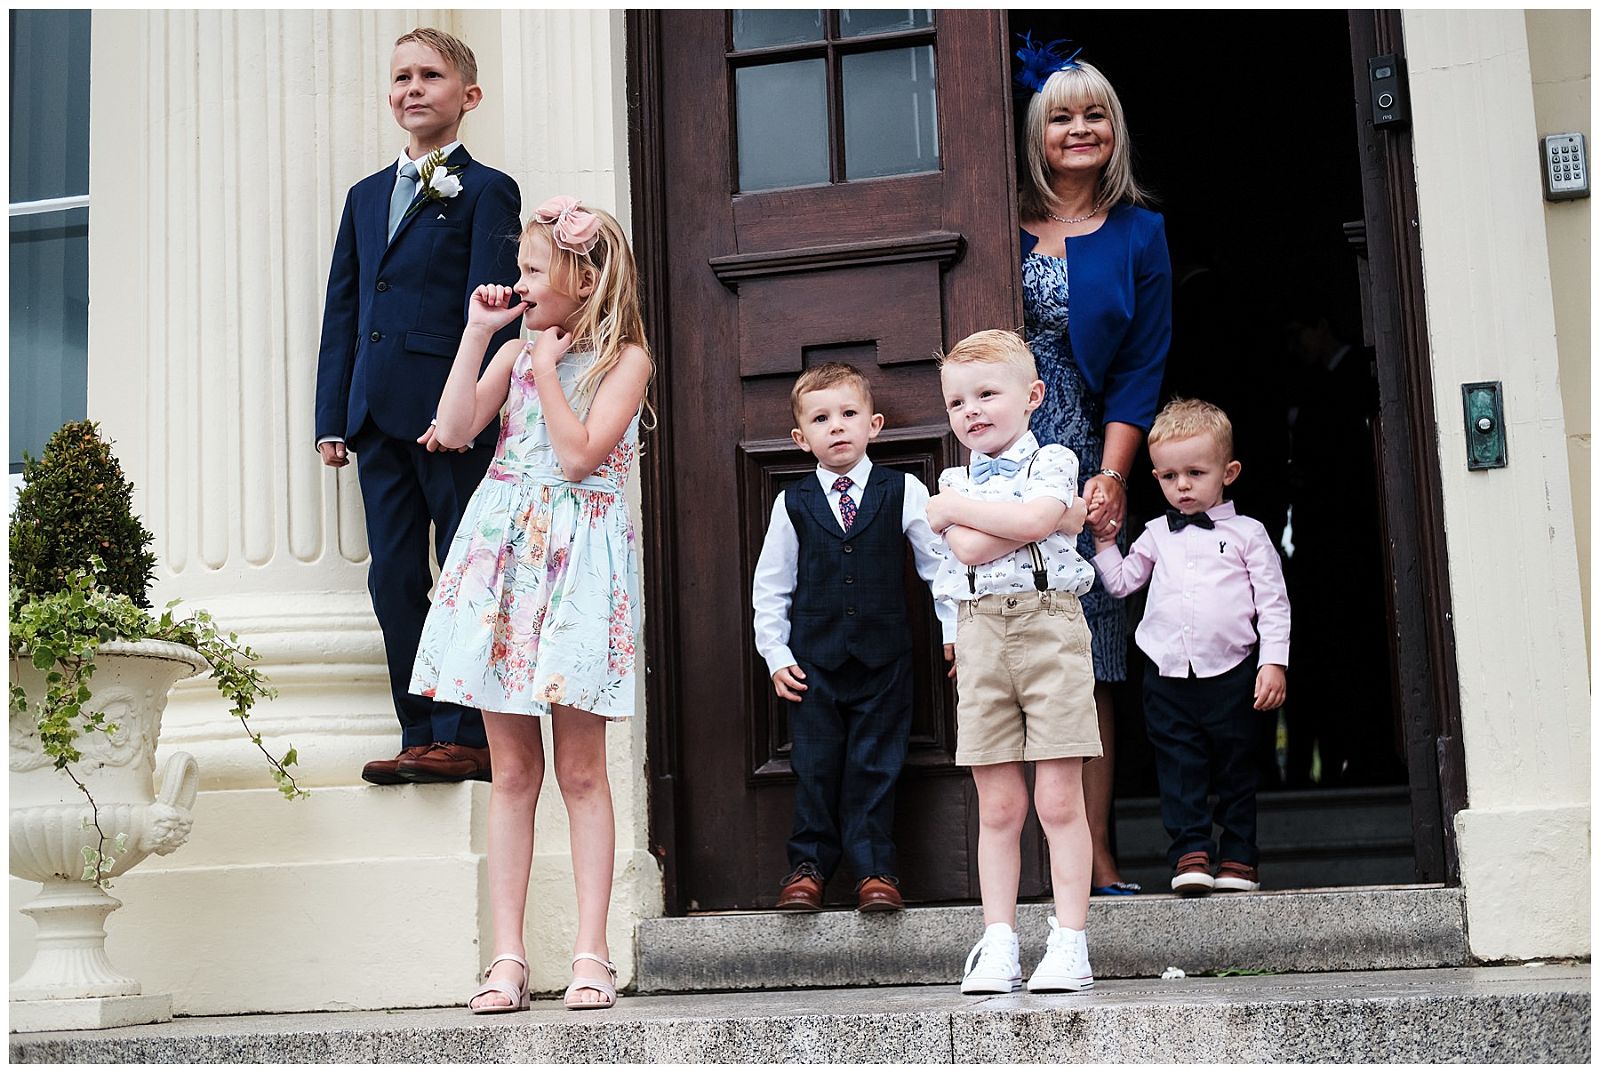 Candid photographs capturing the arrival of the wedding guests at Hawkstone Hall in Shrewsbury by Documentary Wedding Photographer Stuart James